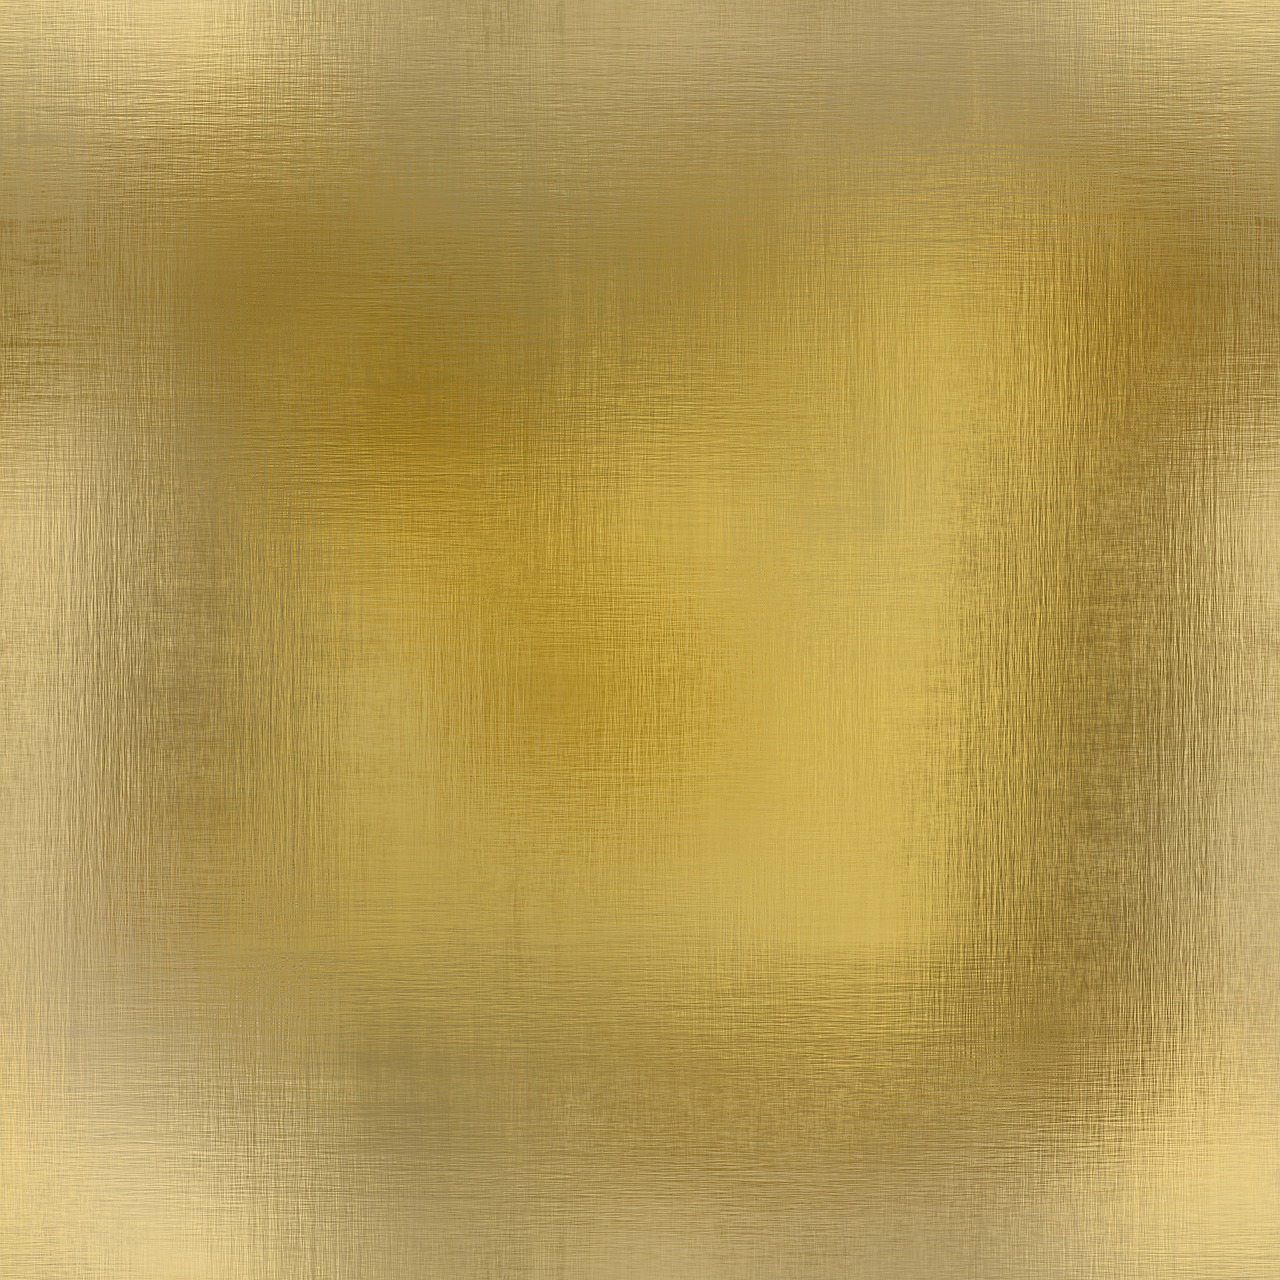 background canvas gold free photo